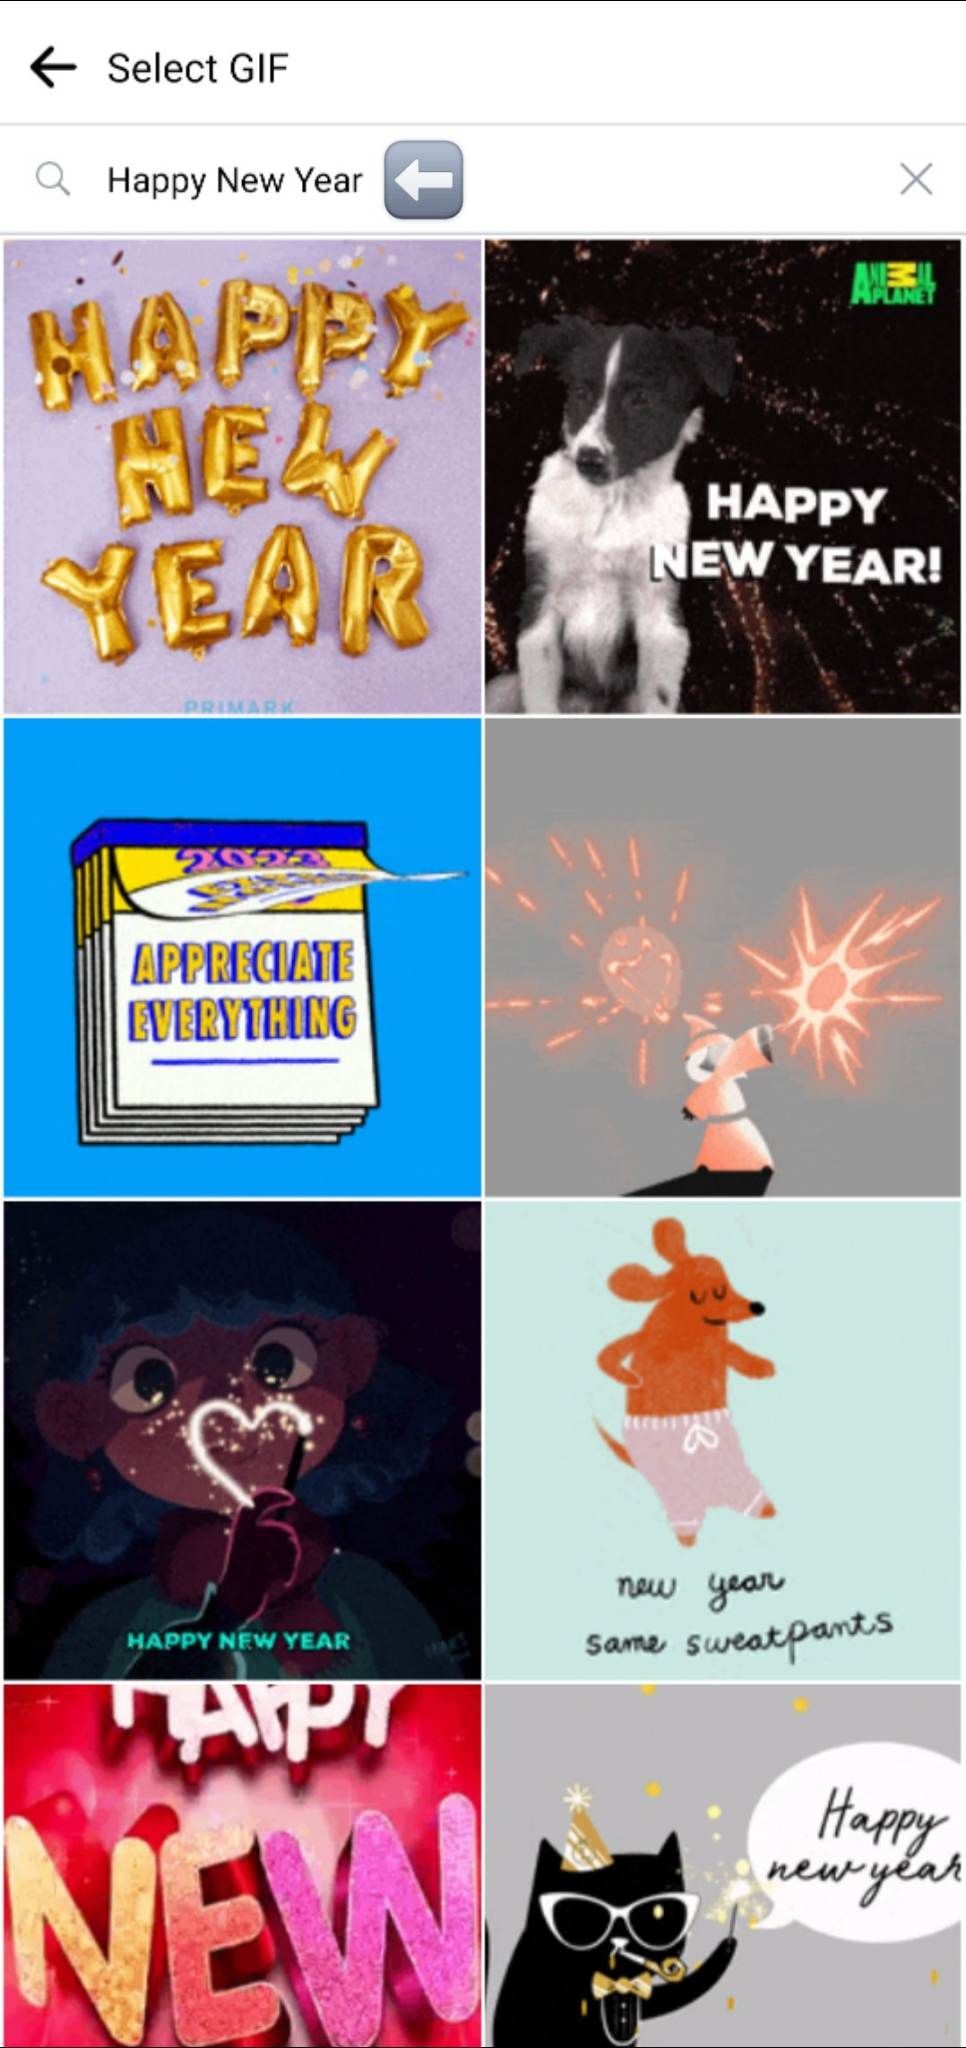 facebook-new-year-gif-mobile